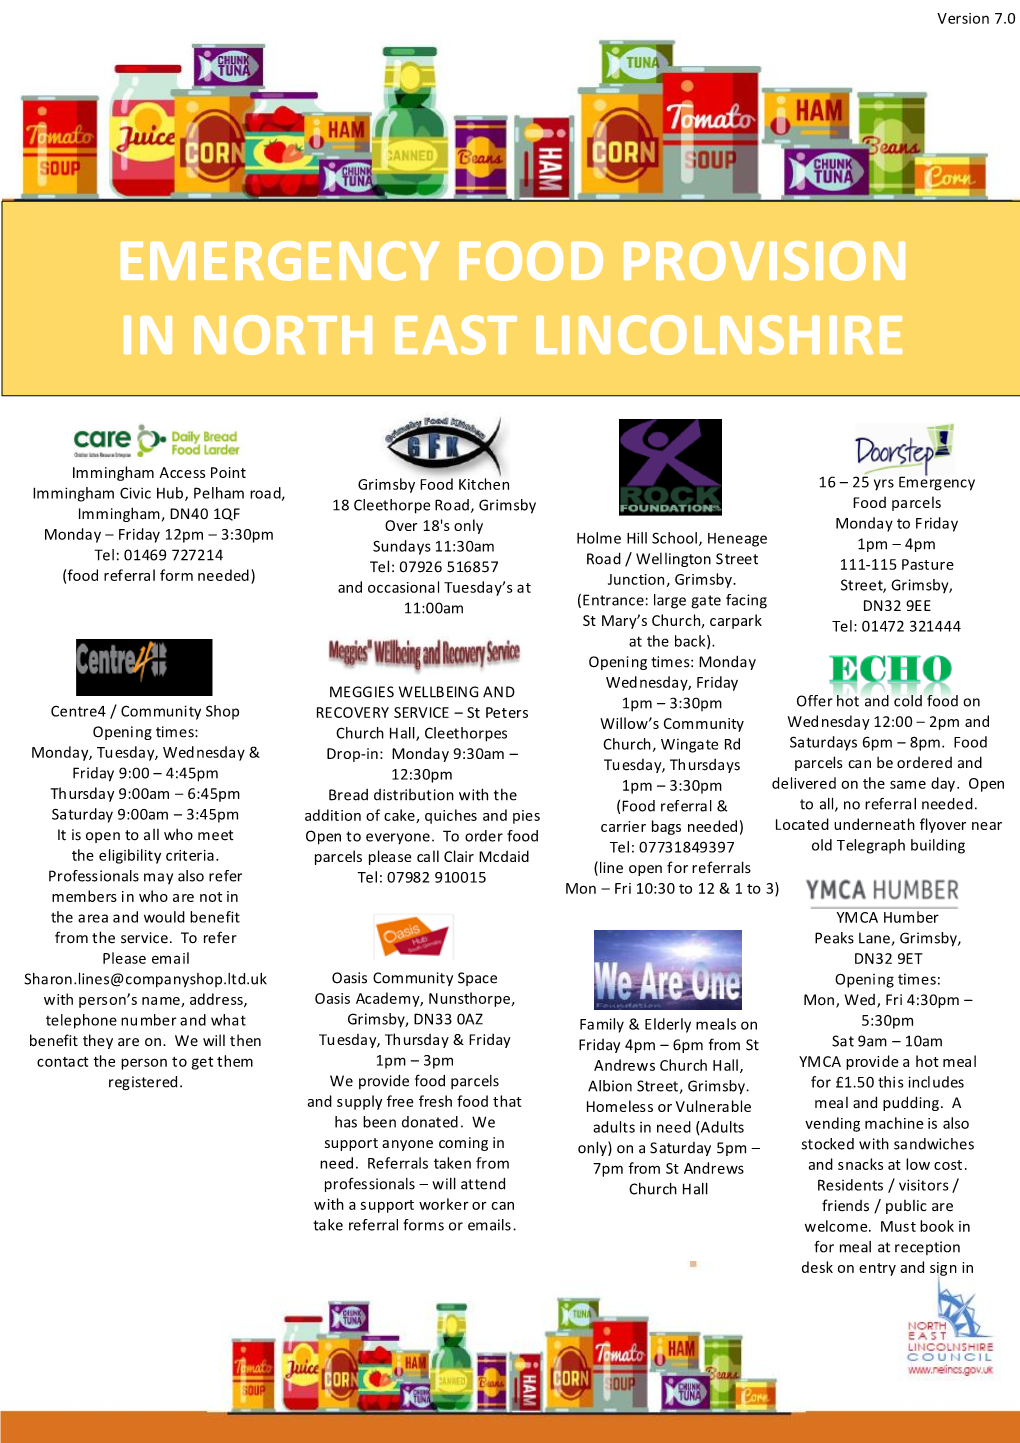 Emergency Food Provision in North East Lincolnshire